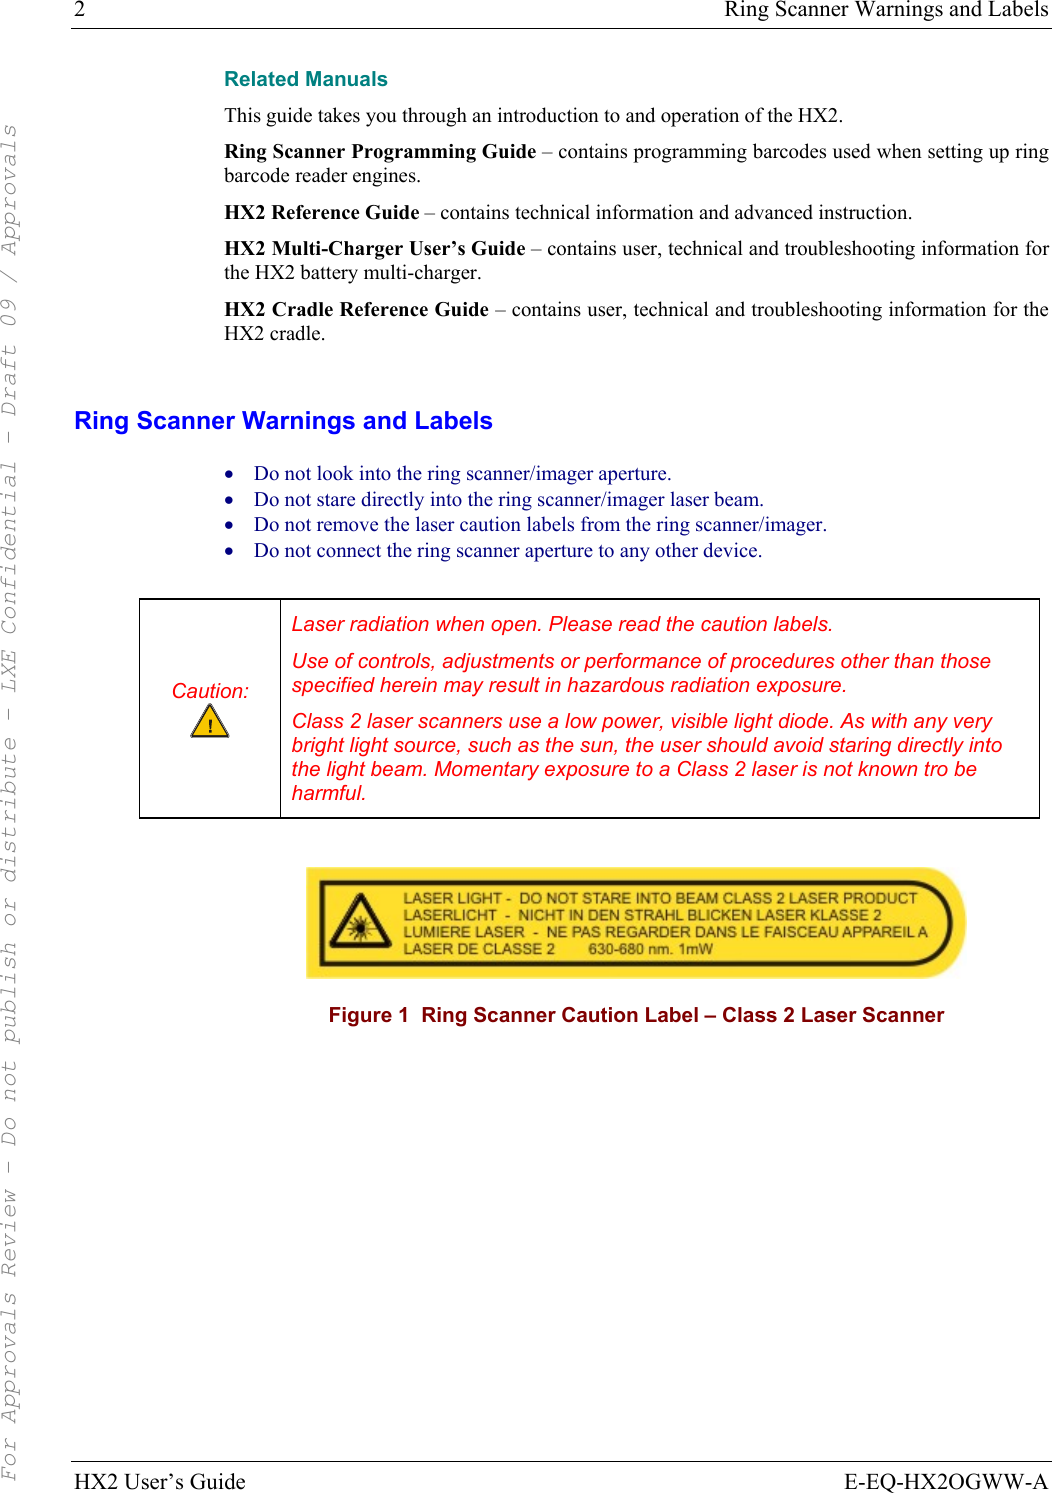 2  Ring Scanner Warnings and Labels HX2 User’s Guide  E-EQ-HX2OGWW-A Related Manuals This guide takes you through an introduction to and operation of the HX2.  Ring Scanner Programming Guide – contains programming barcodes used when setting up ring barcode reader engines. HX2 Reference Guide – contains technical information and advanced instruction. HX2 Multi-Charger User’s Guide – contains user, technical and troubleshooting information for the HX2 battery multi-charger. HX2 Cradle Reference Guide – contains user, technical and troubleshooting information for the HX2 cradle.  Ring Scanner Warnings and Labels • Do not look into the ring scanner/imager aperture. • Do not stare directly into the ring scanner/imager laser beam.  • Do not remove the laser caution labels from the ring scanner/imager.  • Do not connect the ring scanner aperture to any other device.  Caution:  Laser radiation when open. Please read the caution labels. Use of controls, adjustments or performance of procedures other than those specified herein may result in hazardous radiation exposure. Class 2 laser scanners use a low power, visible light diode. As with any very bright light source, such as the sun, the user should avoid staring directly into the light beam. Momentary exposure to a Class 2 laser is not known tro be harmful.   Figure 1  Ring Scanner Caution Label – Class 2 Laser Scanner   For Approvals Review - Do not publish or distribute - LXE Confidential - Draft 09 / Approvals